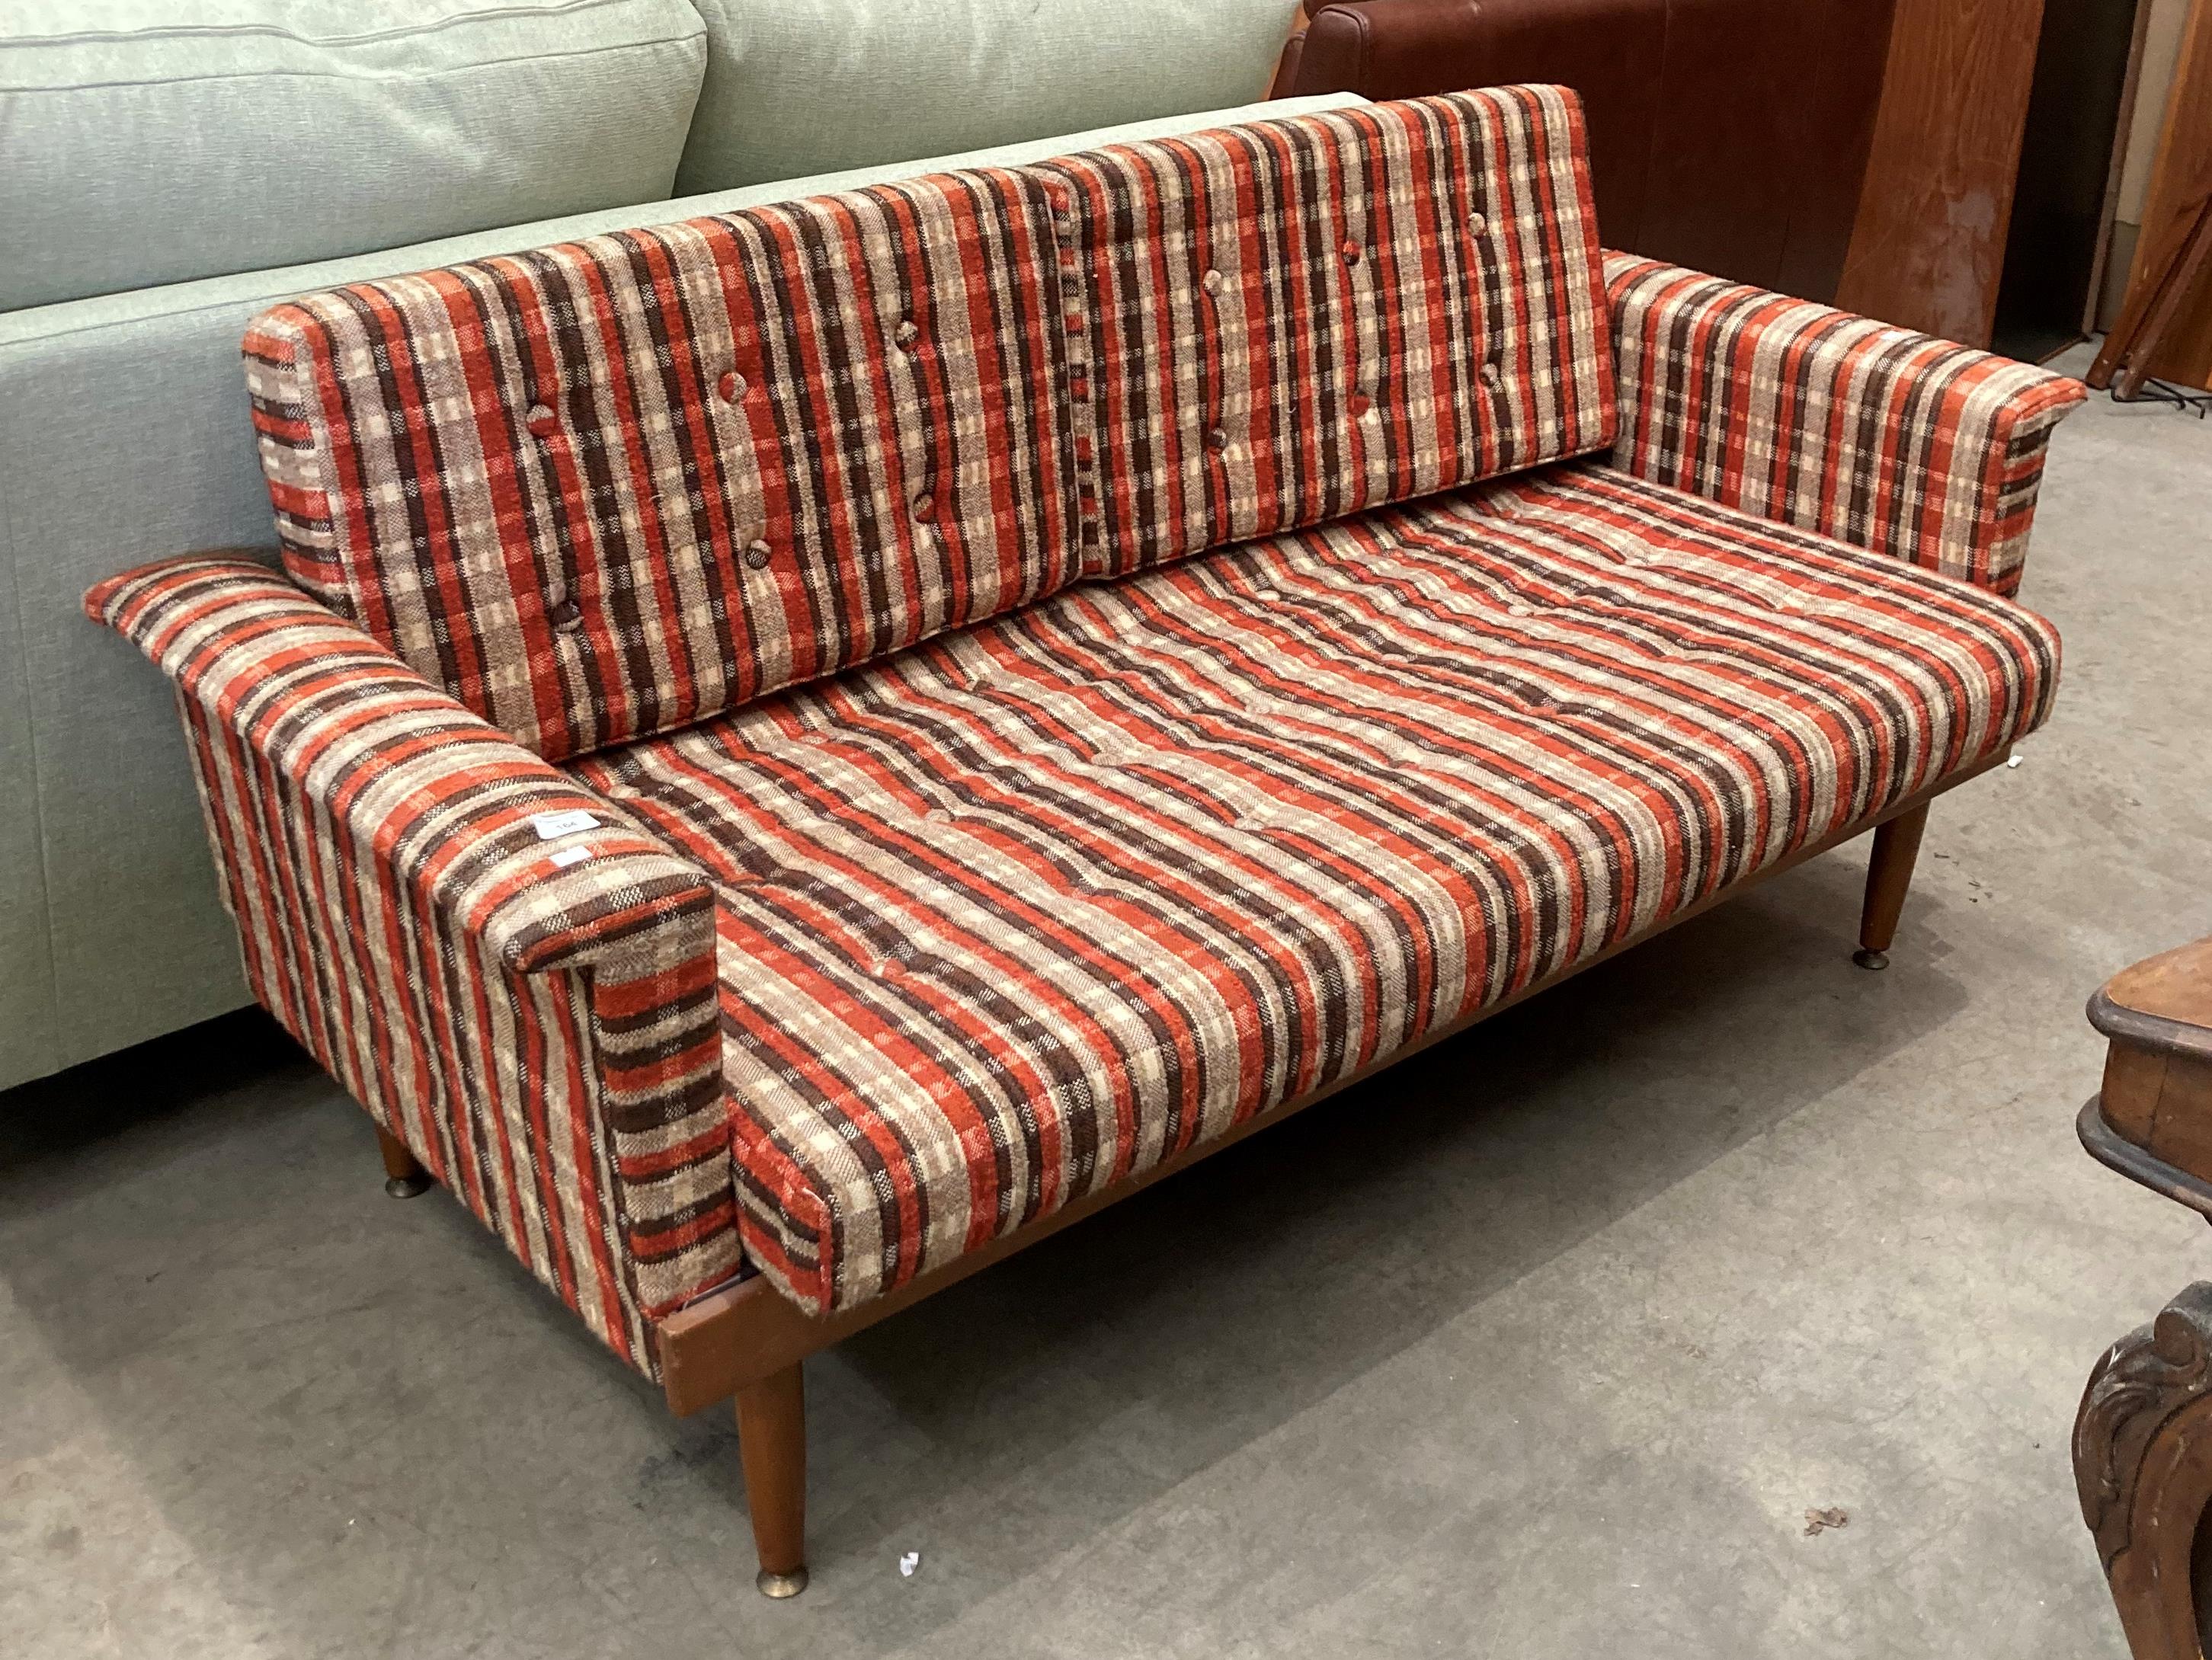 A mid Twentieth Century teak framed bed settee with brown/red and ivory patterned upholstery -